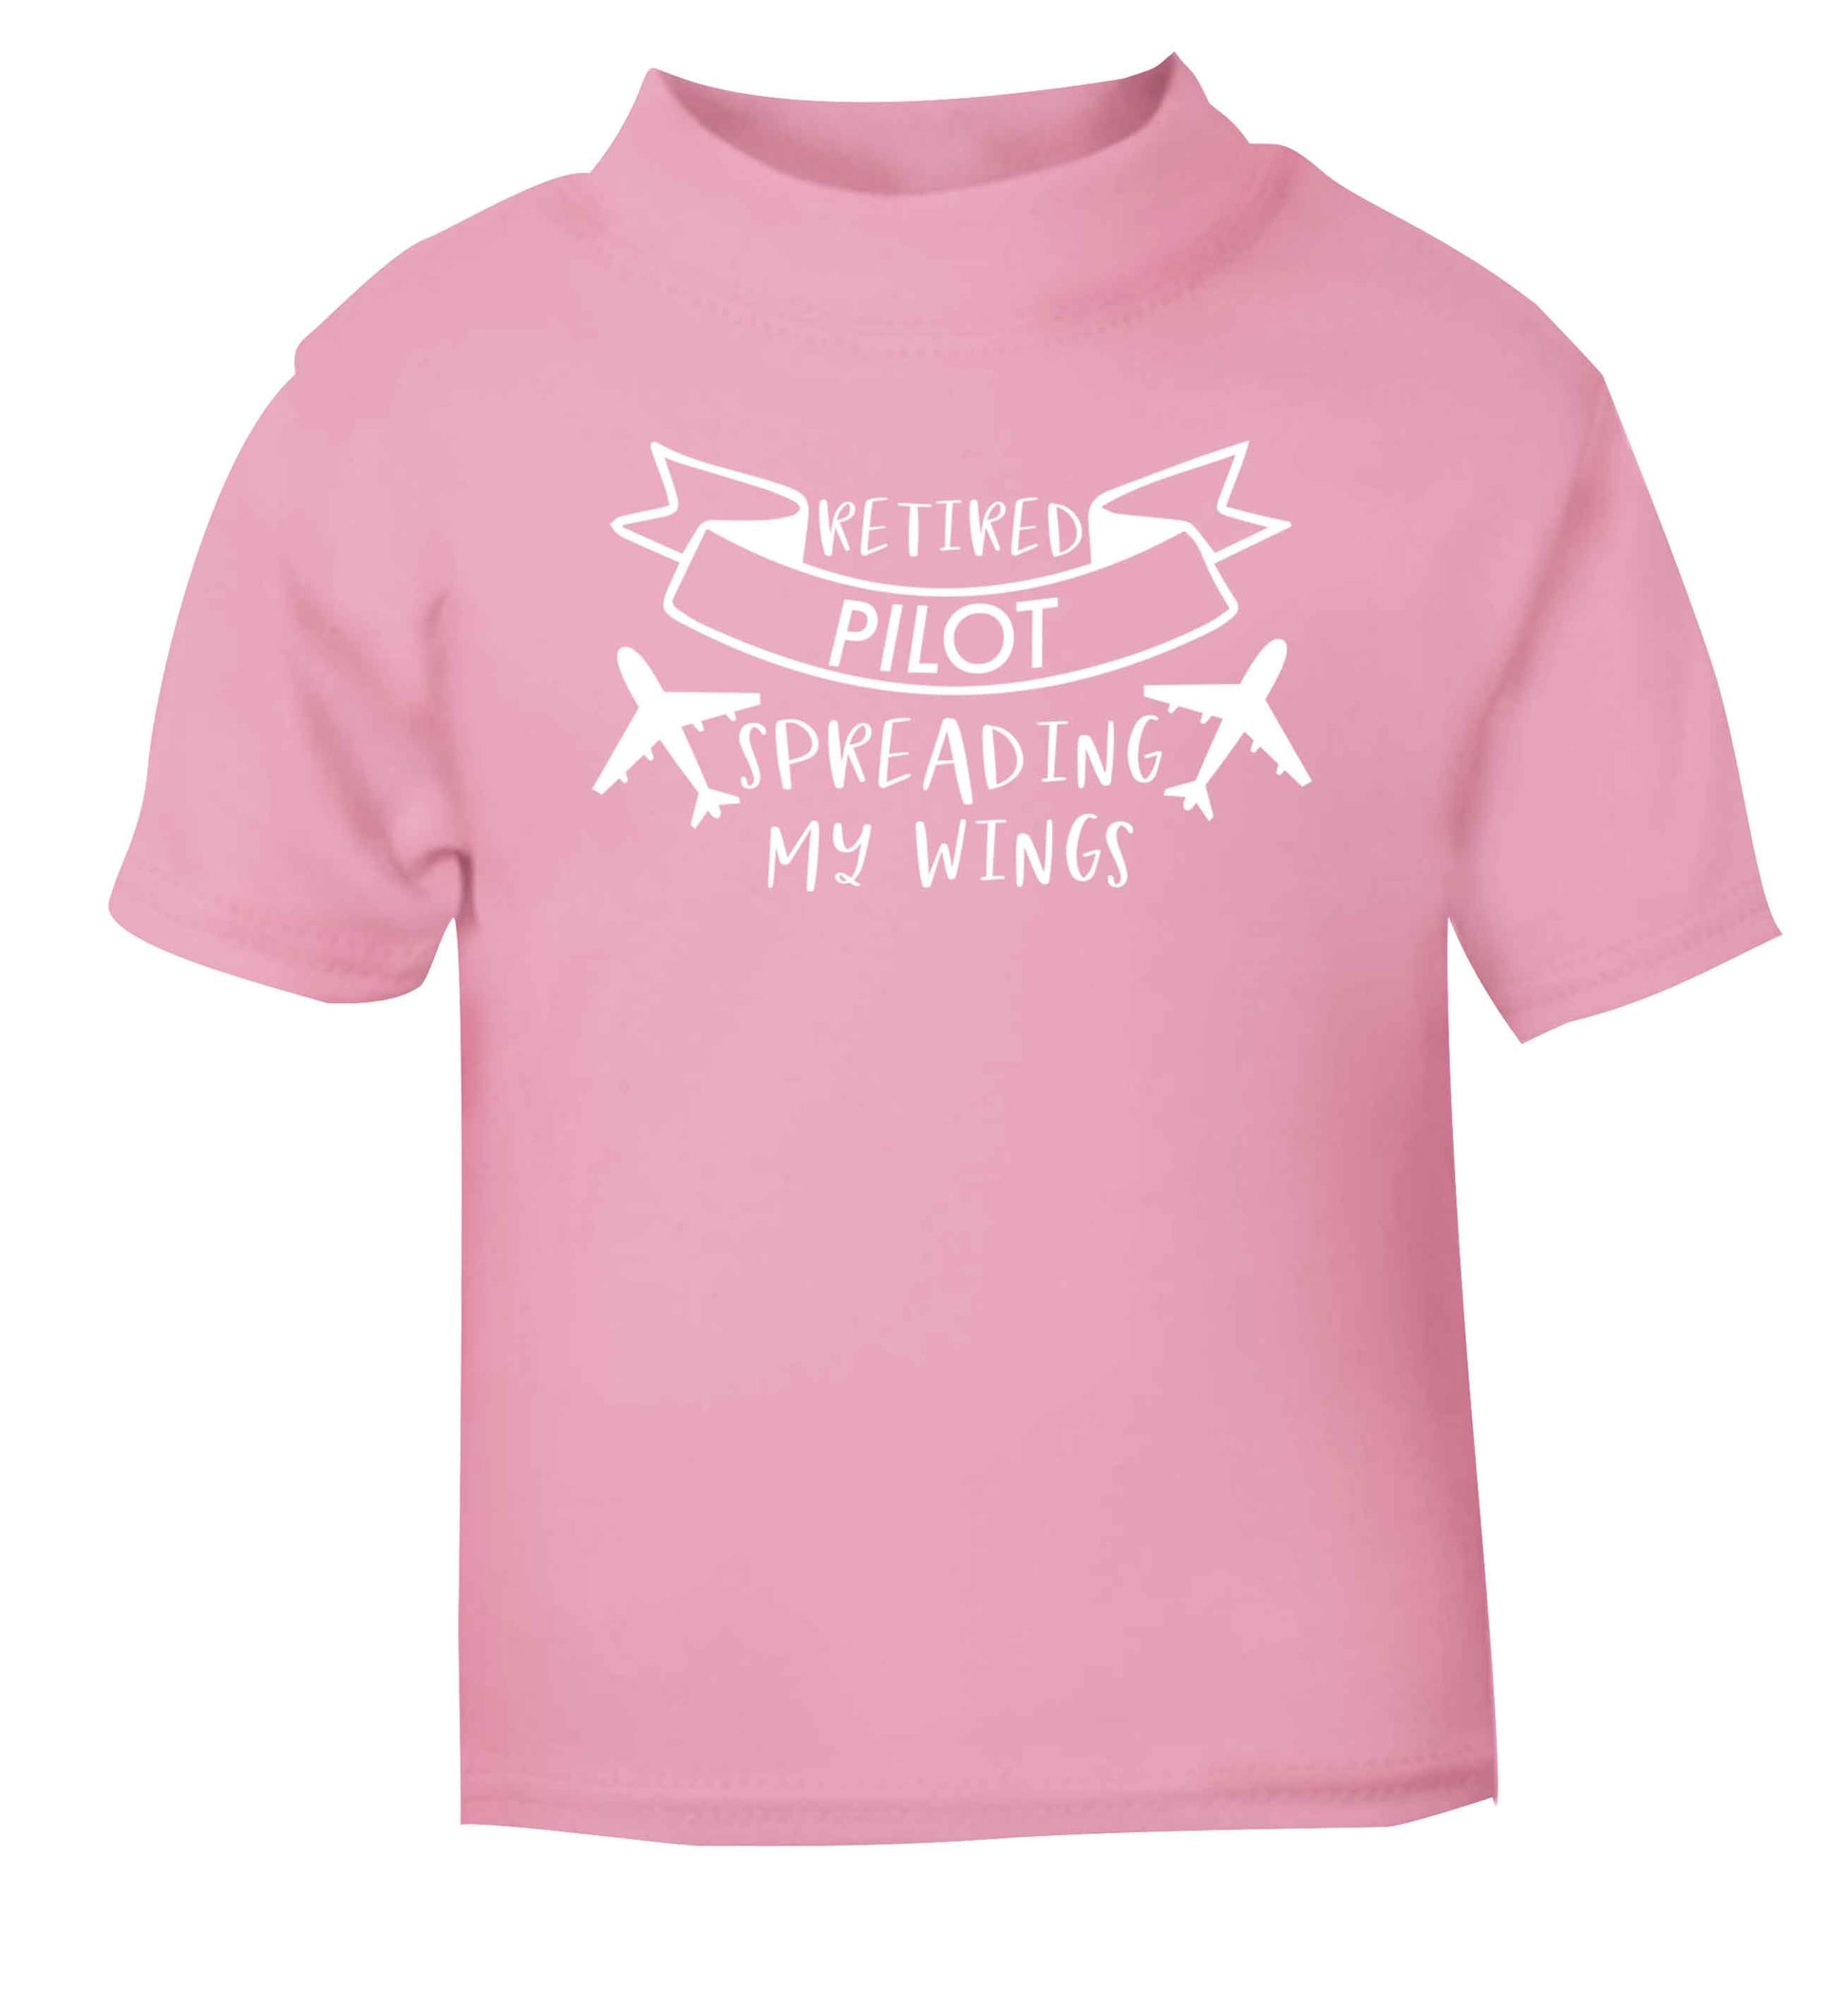 Retired pilot spreading my wings light pink Baby Toddler Tshirt 2 Years